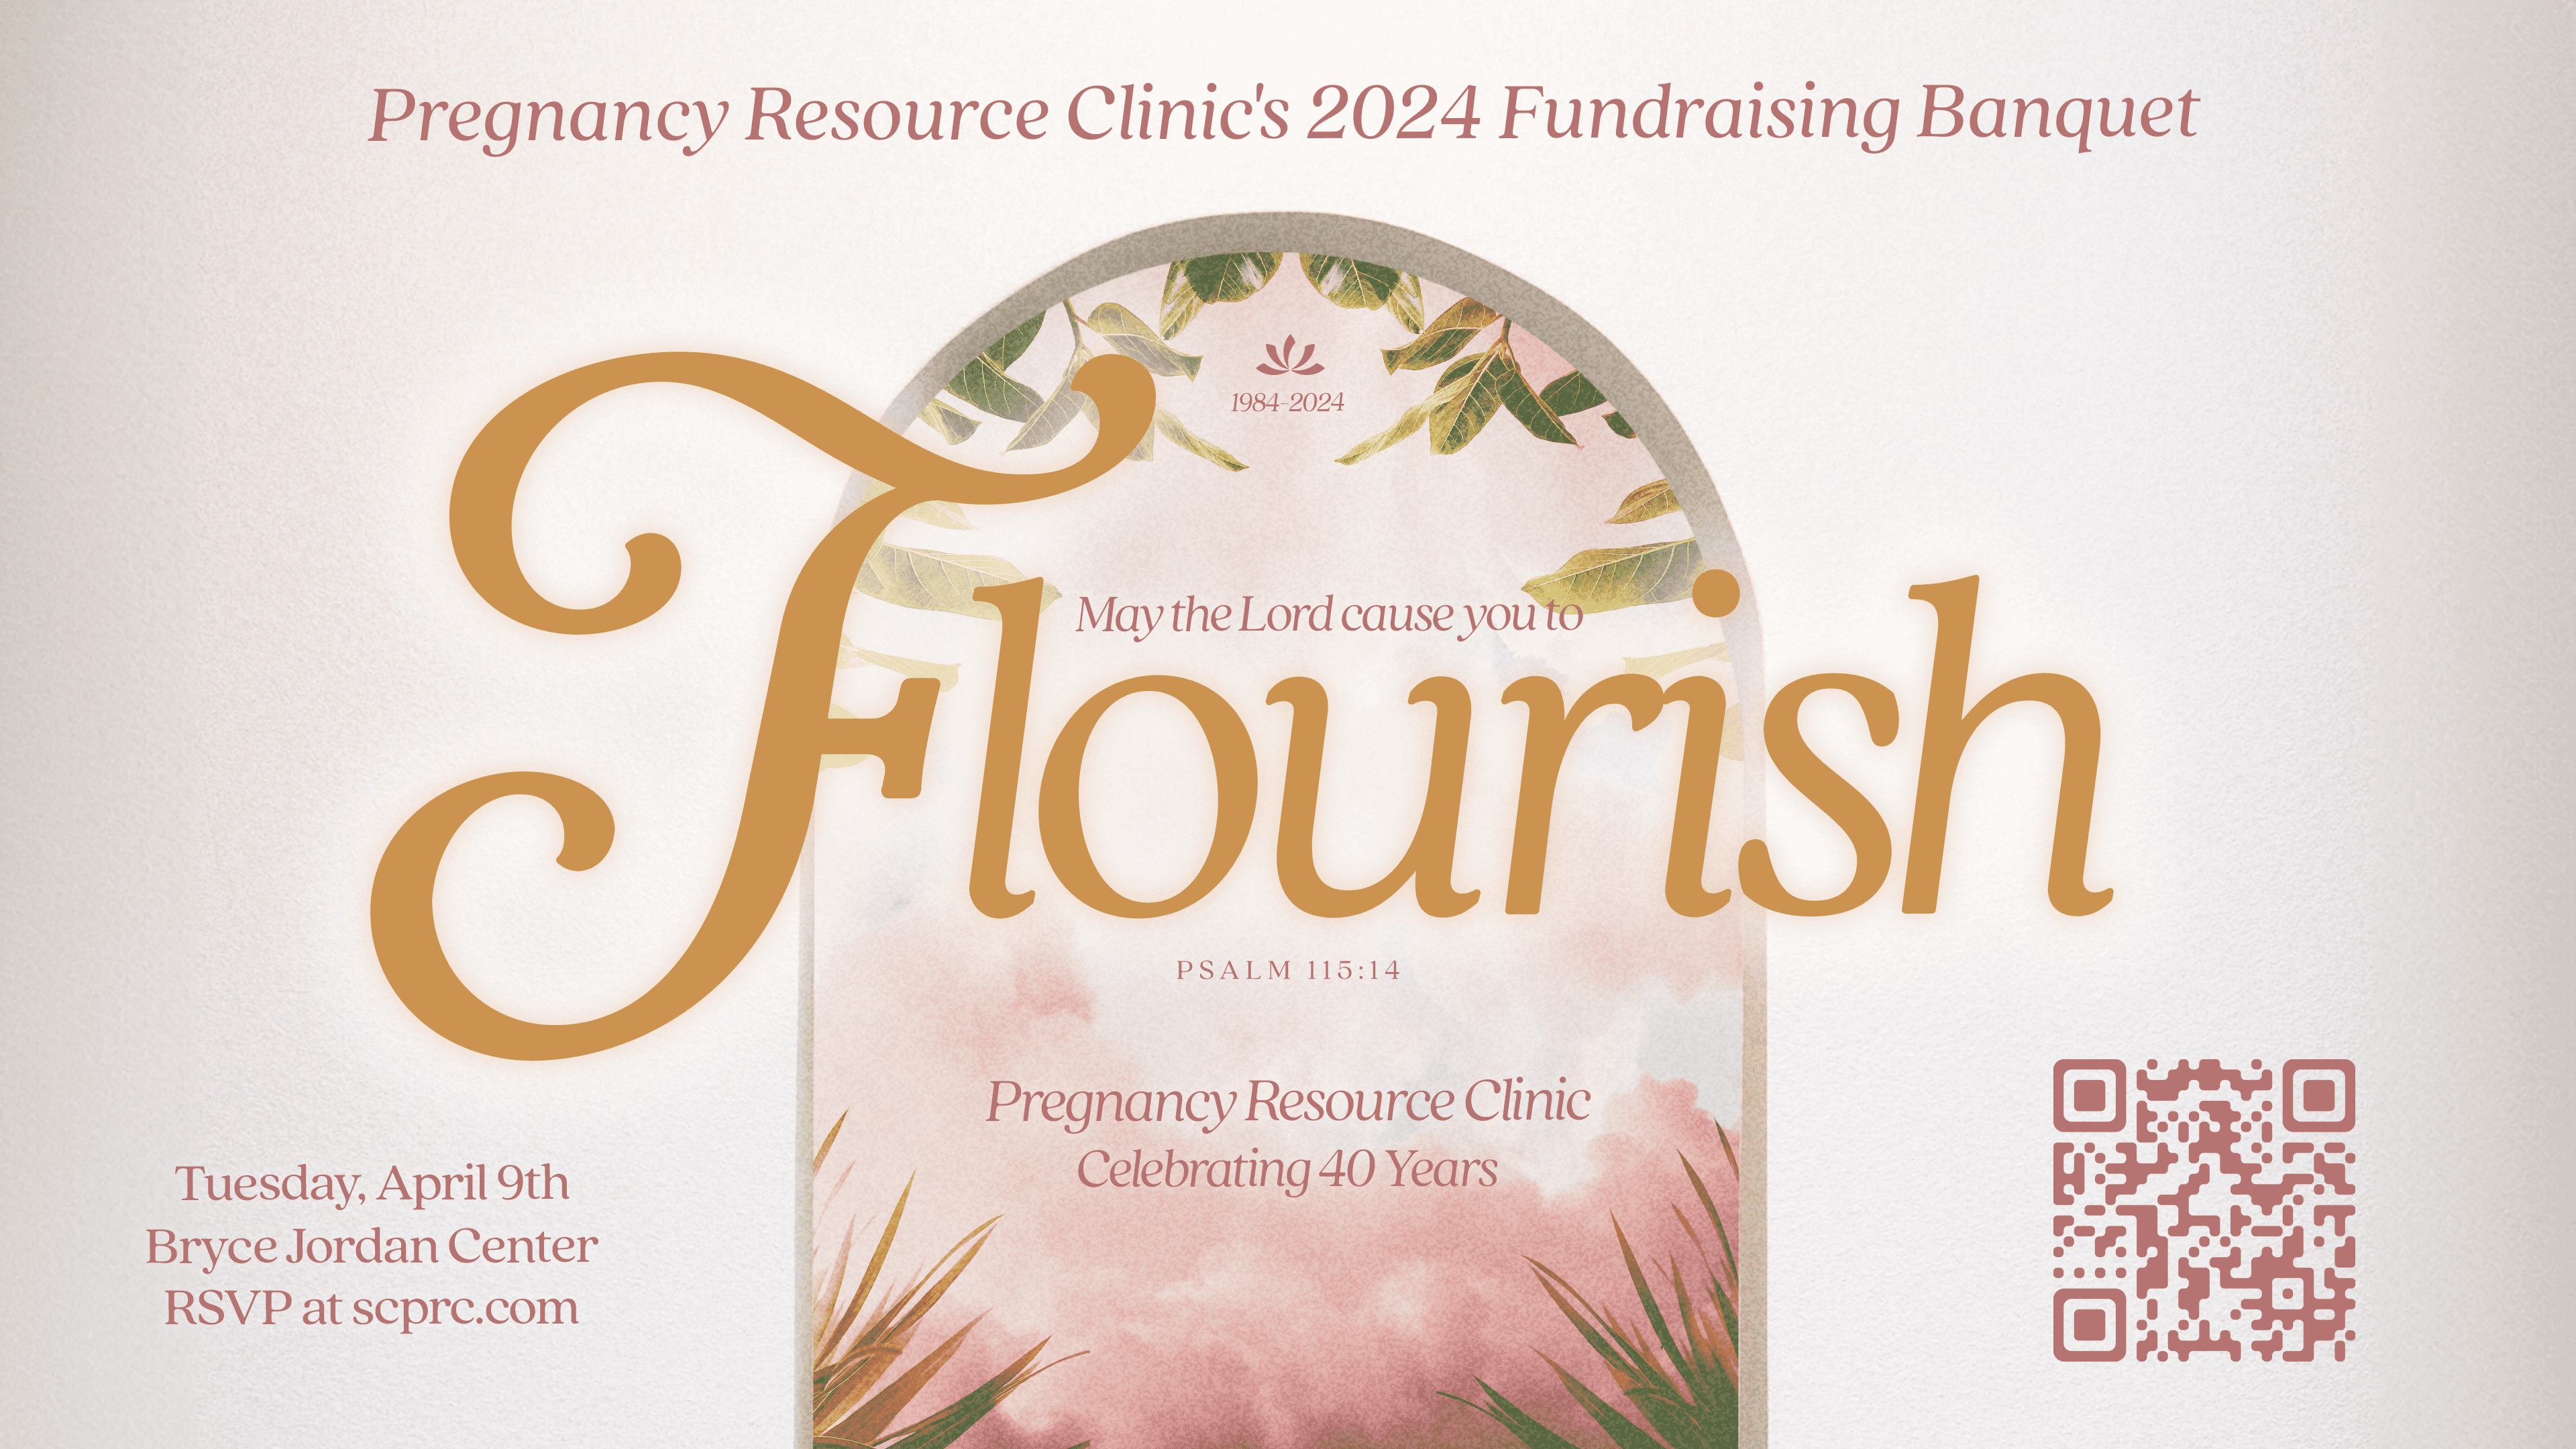 Pregnancy Resource Clinic 2024 Fundraising Banquet